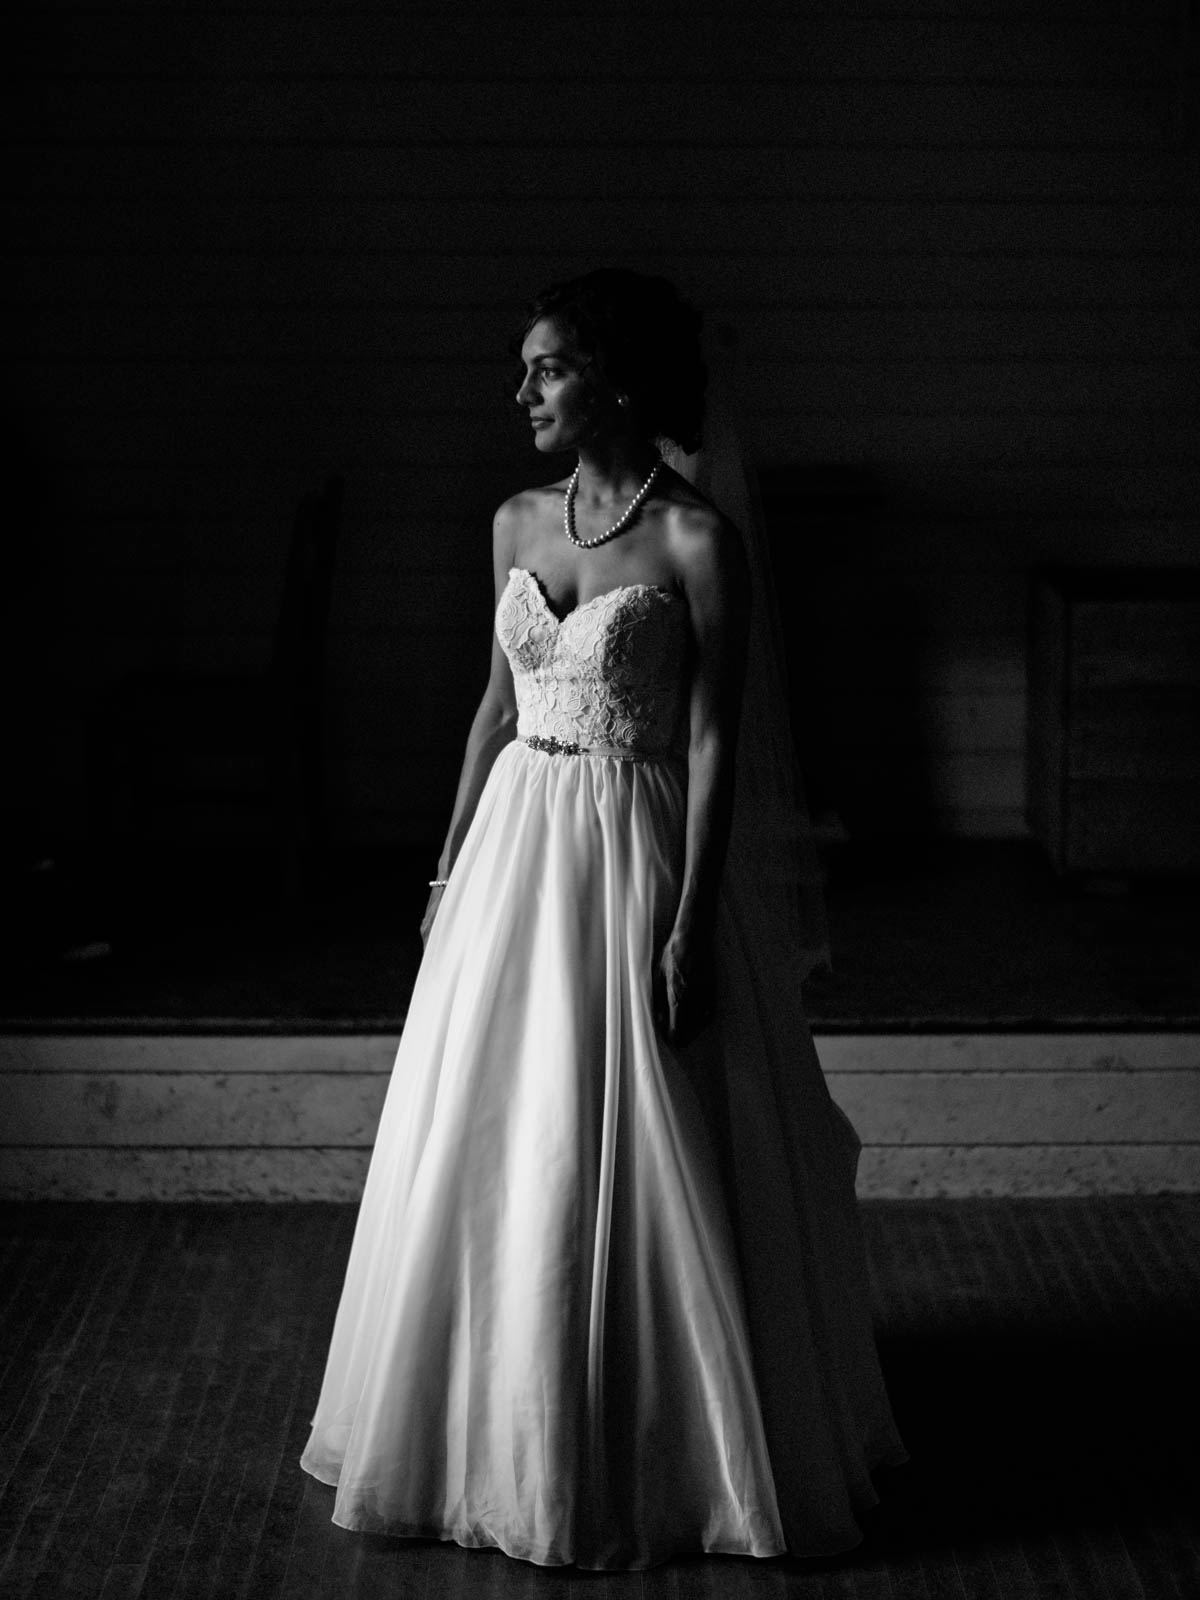 black and white portrait of the bride during a fanshawe pioneer village wedding in london